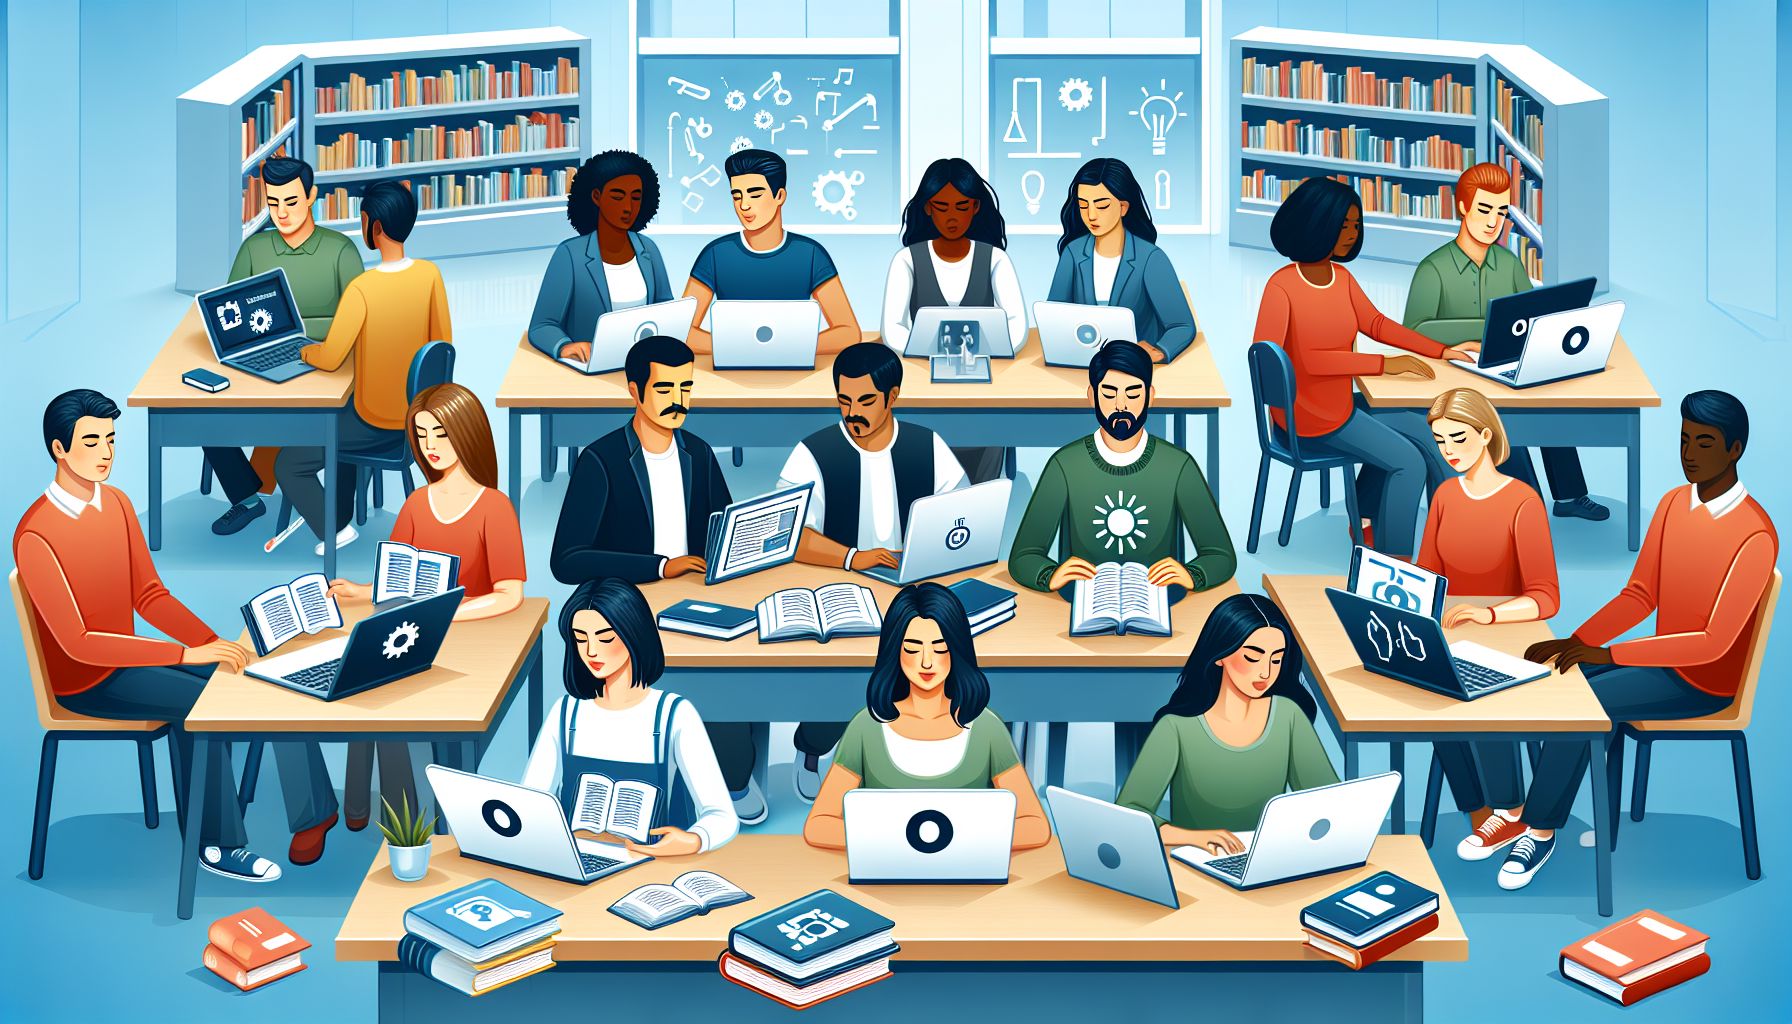 Open Educational Resources: Cost-Effective and Accessible Tools for University Students